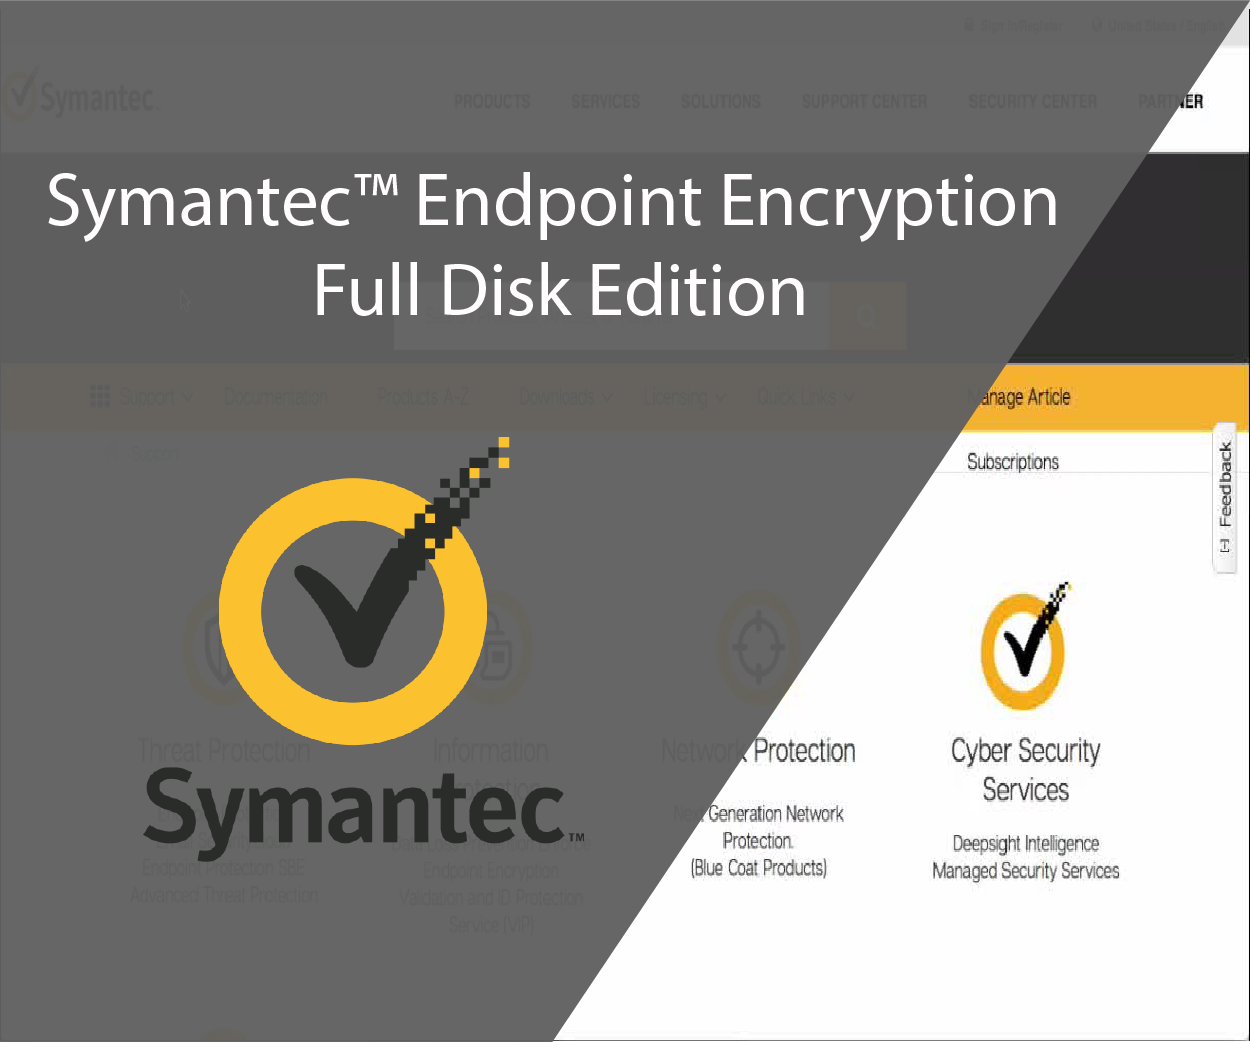 Symantec Endpoint Encryption Full Disk Edition